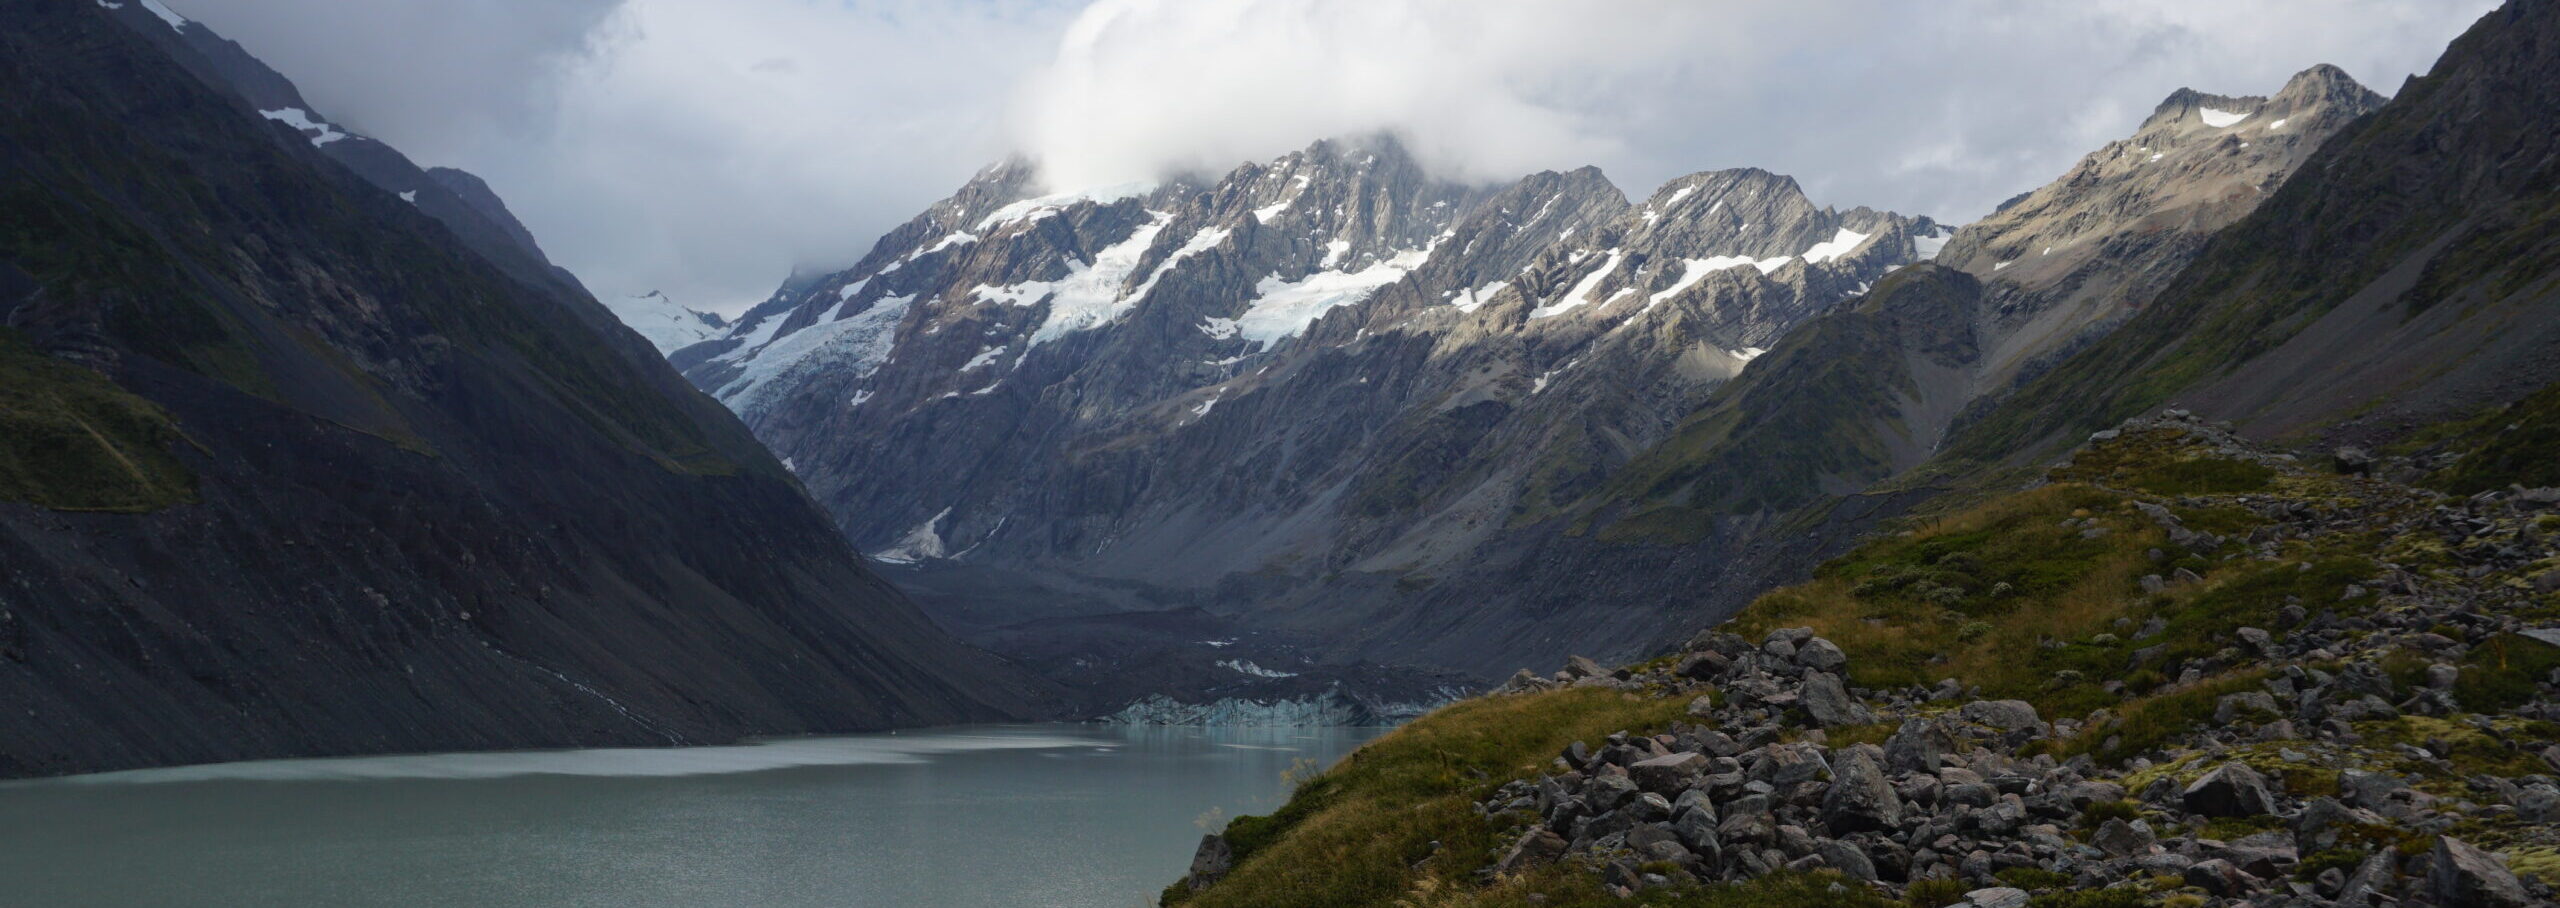 Mount Cook View from Hooker Valley.